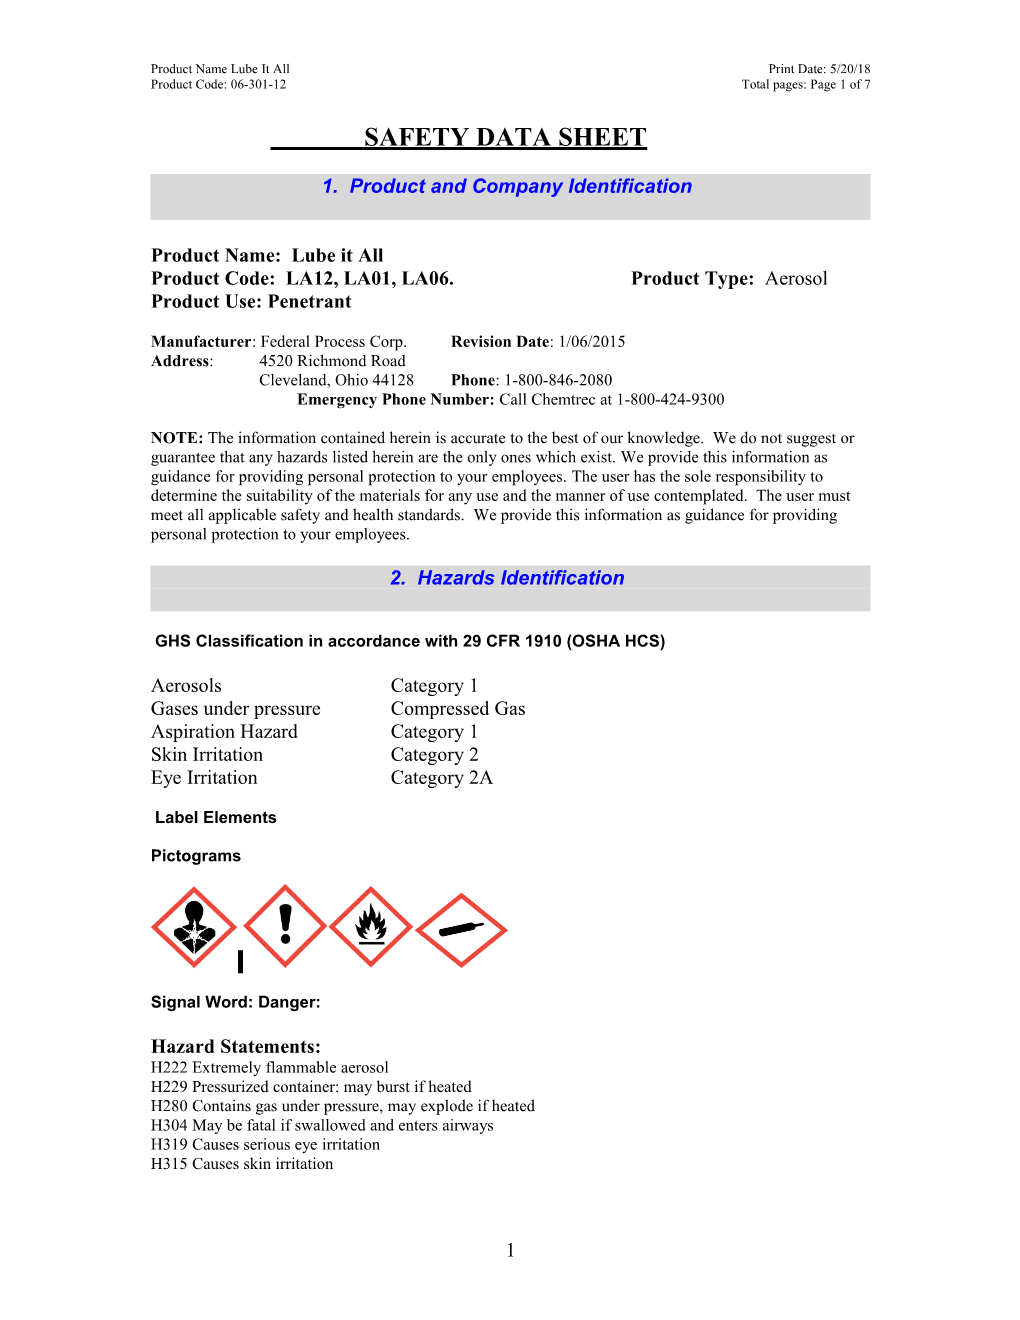 Material Safety Data Sheet s88